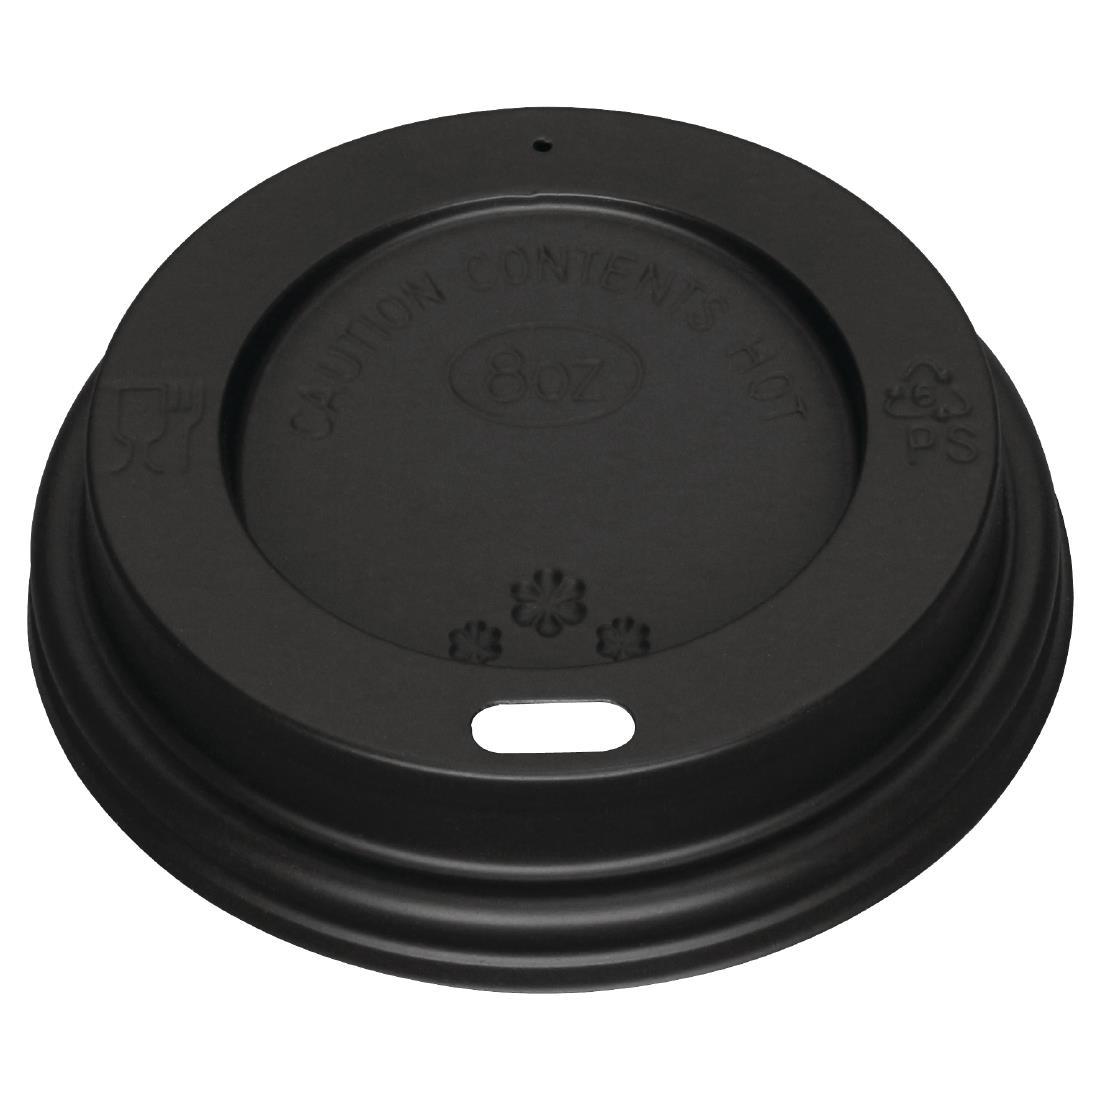 Fiesta Recyclable Coffee Cup Lids Black 225ml / 8oz (Pack of 1000) - CW716  - 1